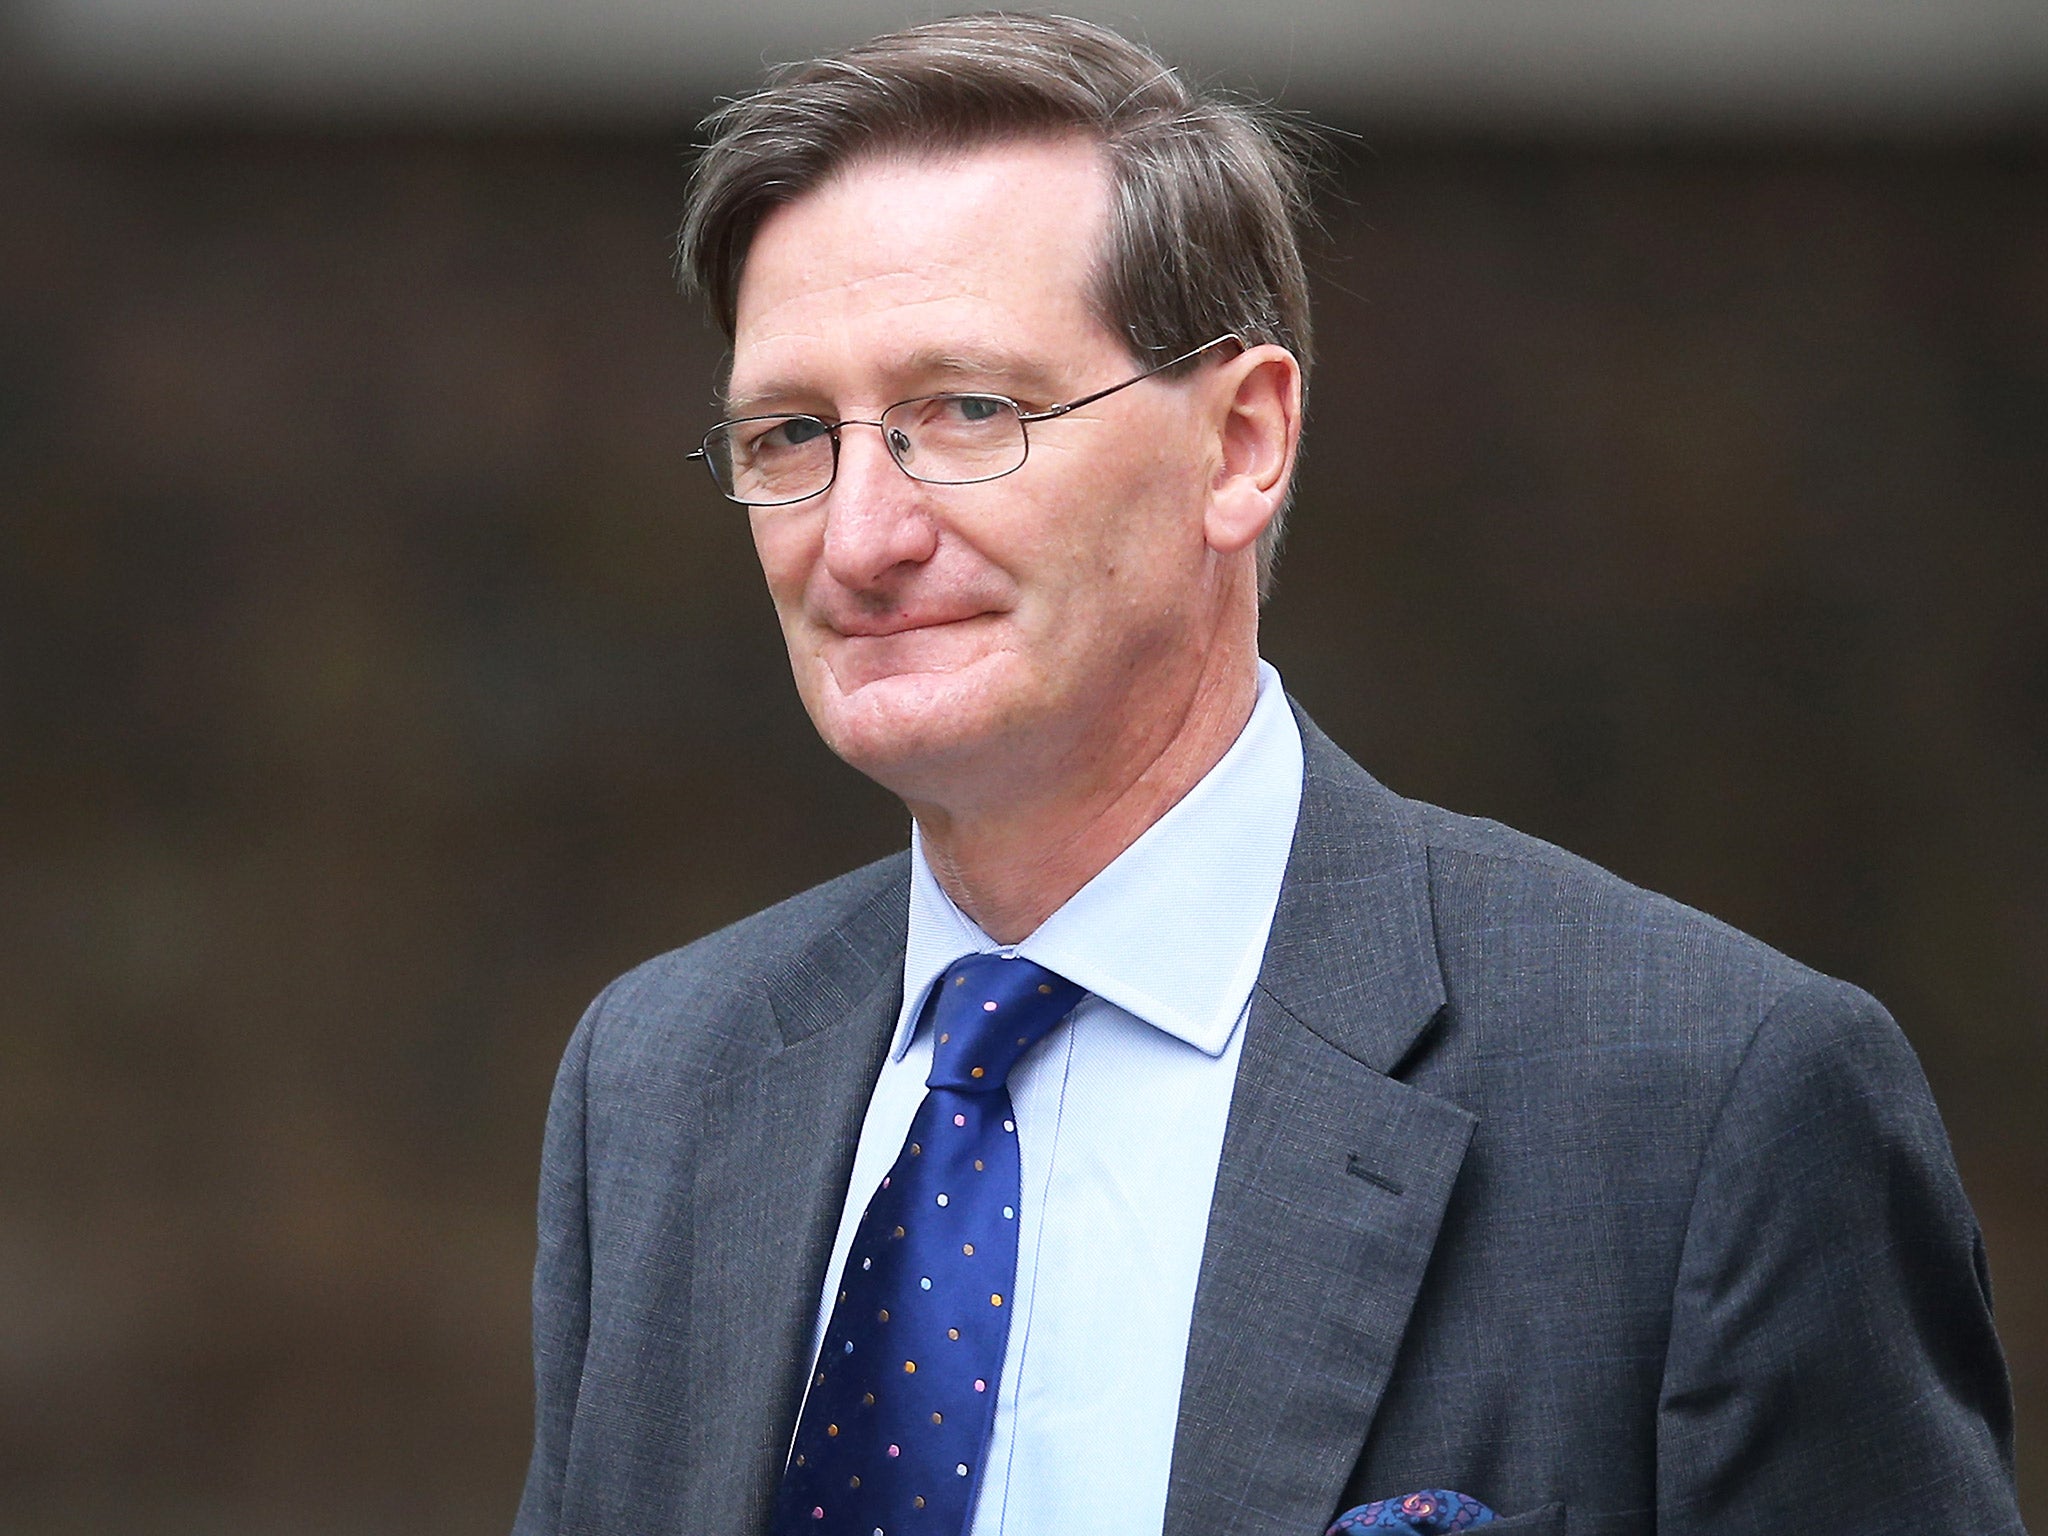 Former attorney general, Dominic Grieve